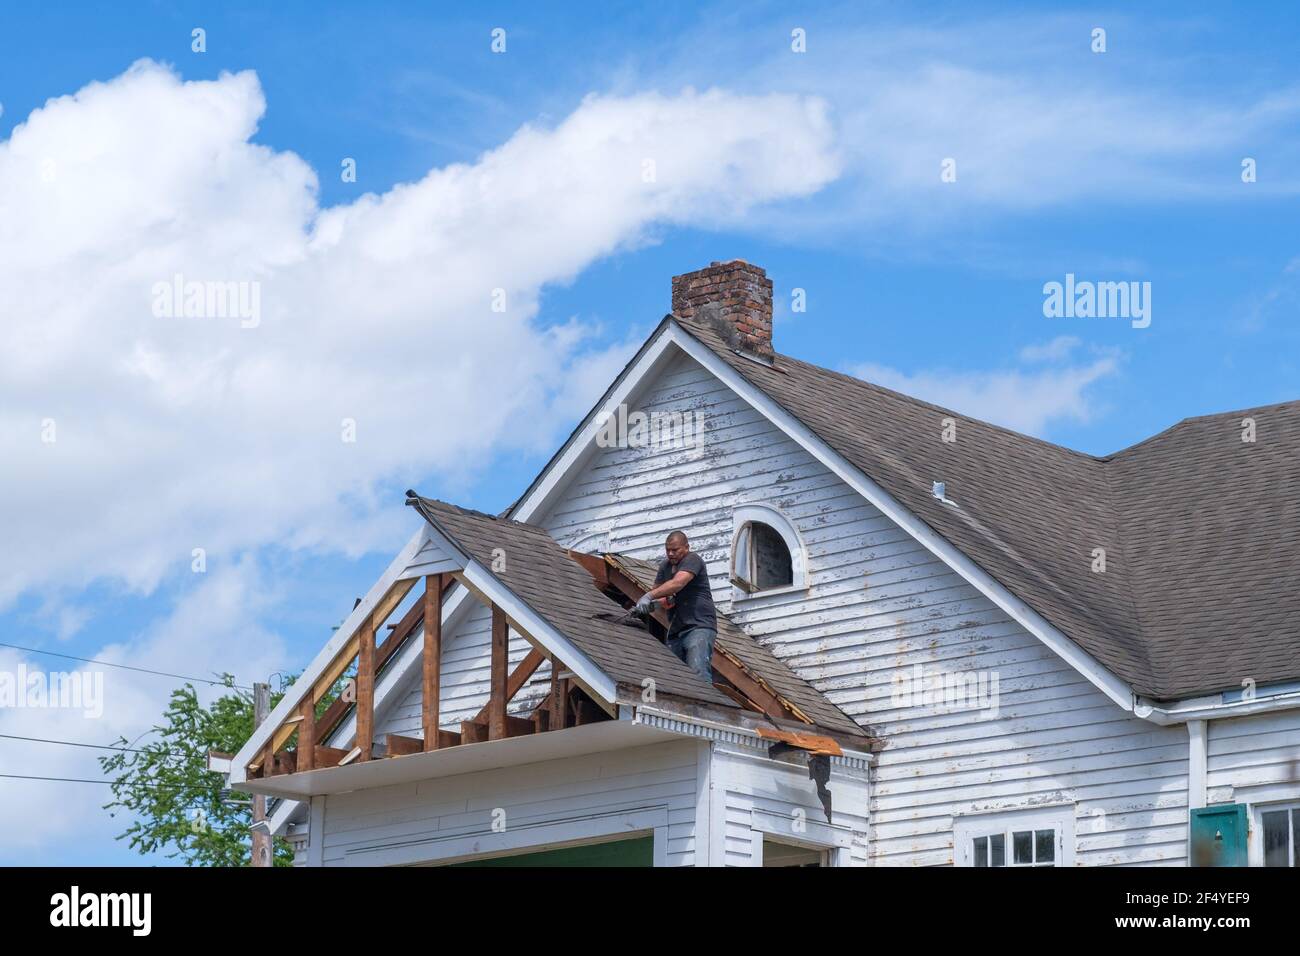 NEW ORLEANS, LA, USA - MARCH 22, 2021: Worker demolishing section of house in preparation for remodeling Stock Photo